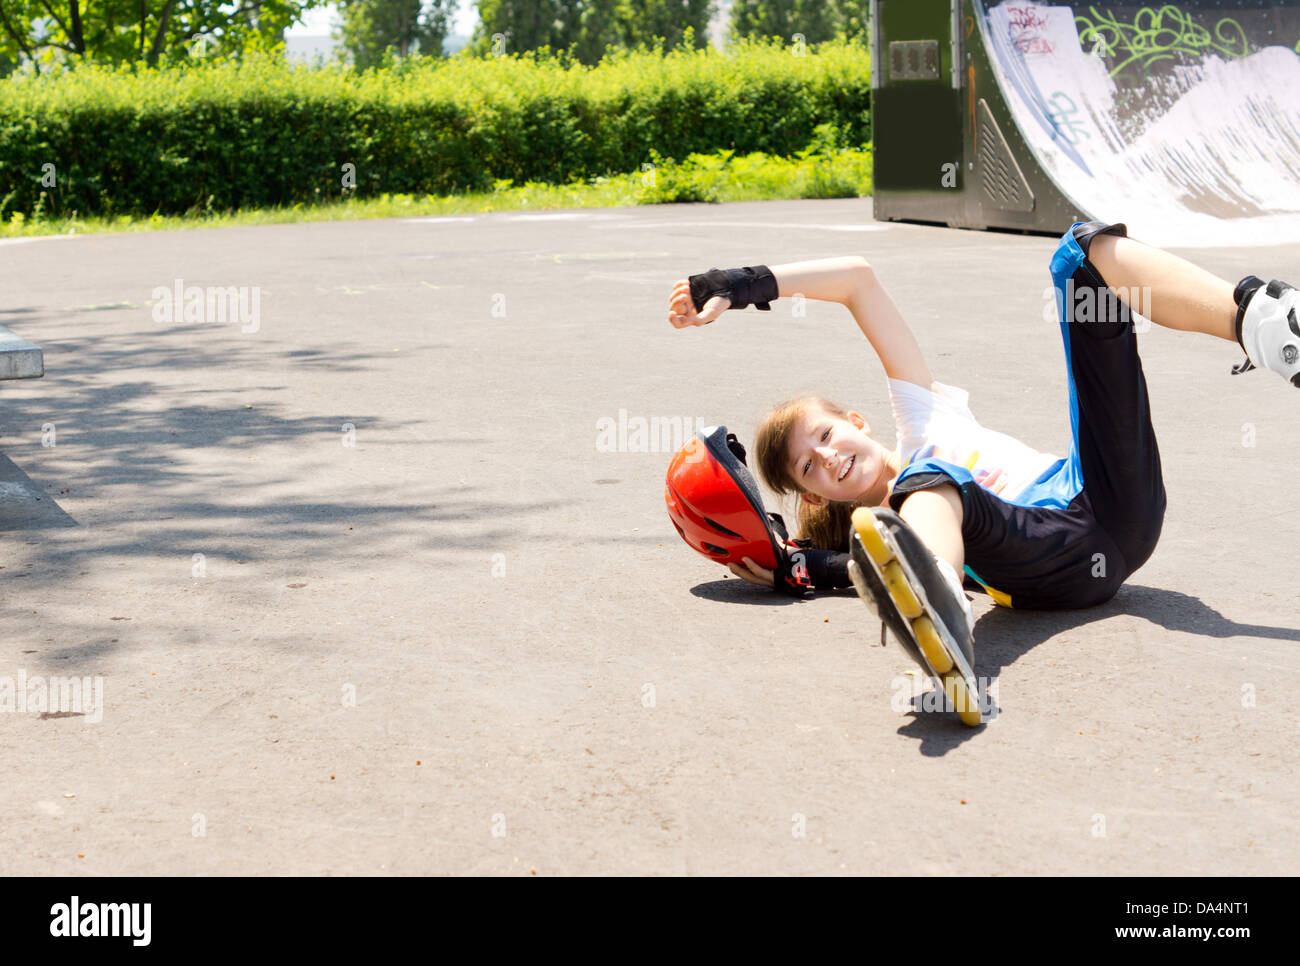 Young girl accident roller skating -Fotos und -Bildmaterial in hoher  Auflösung – Alamy